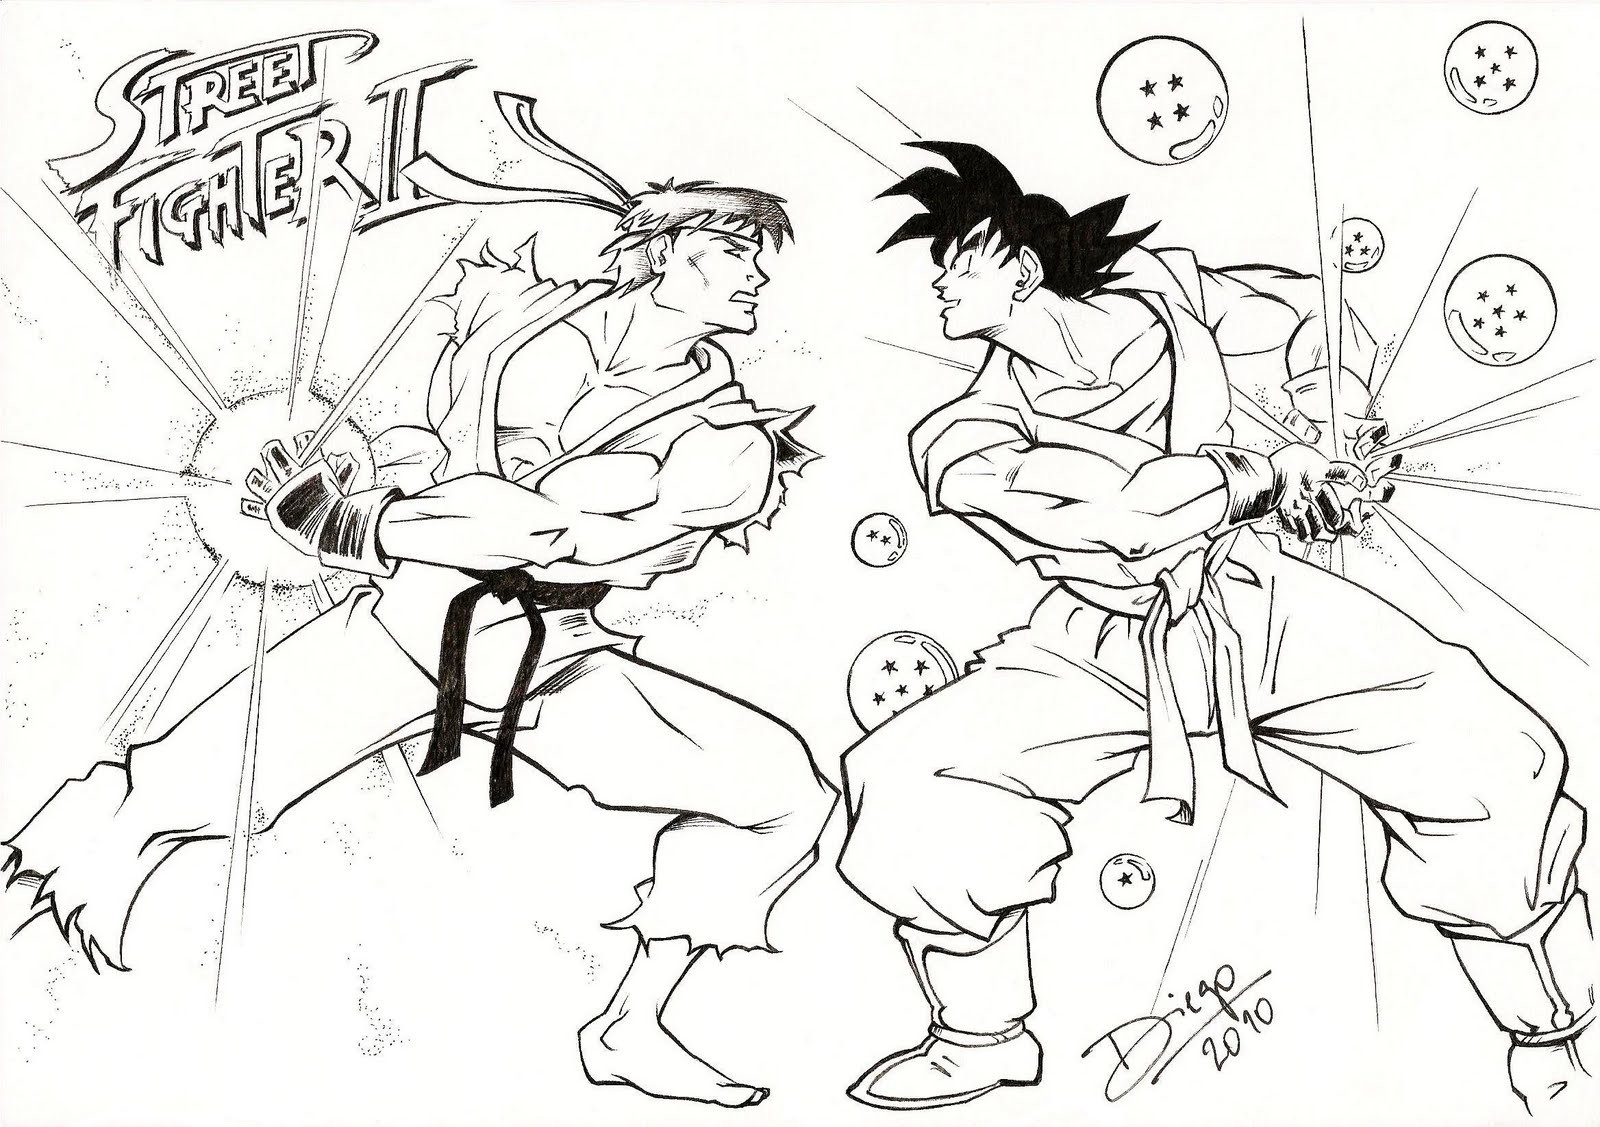 Street Fighter Ryu Coloring Page | tgkr.co